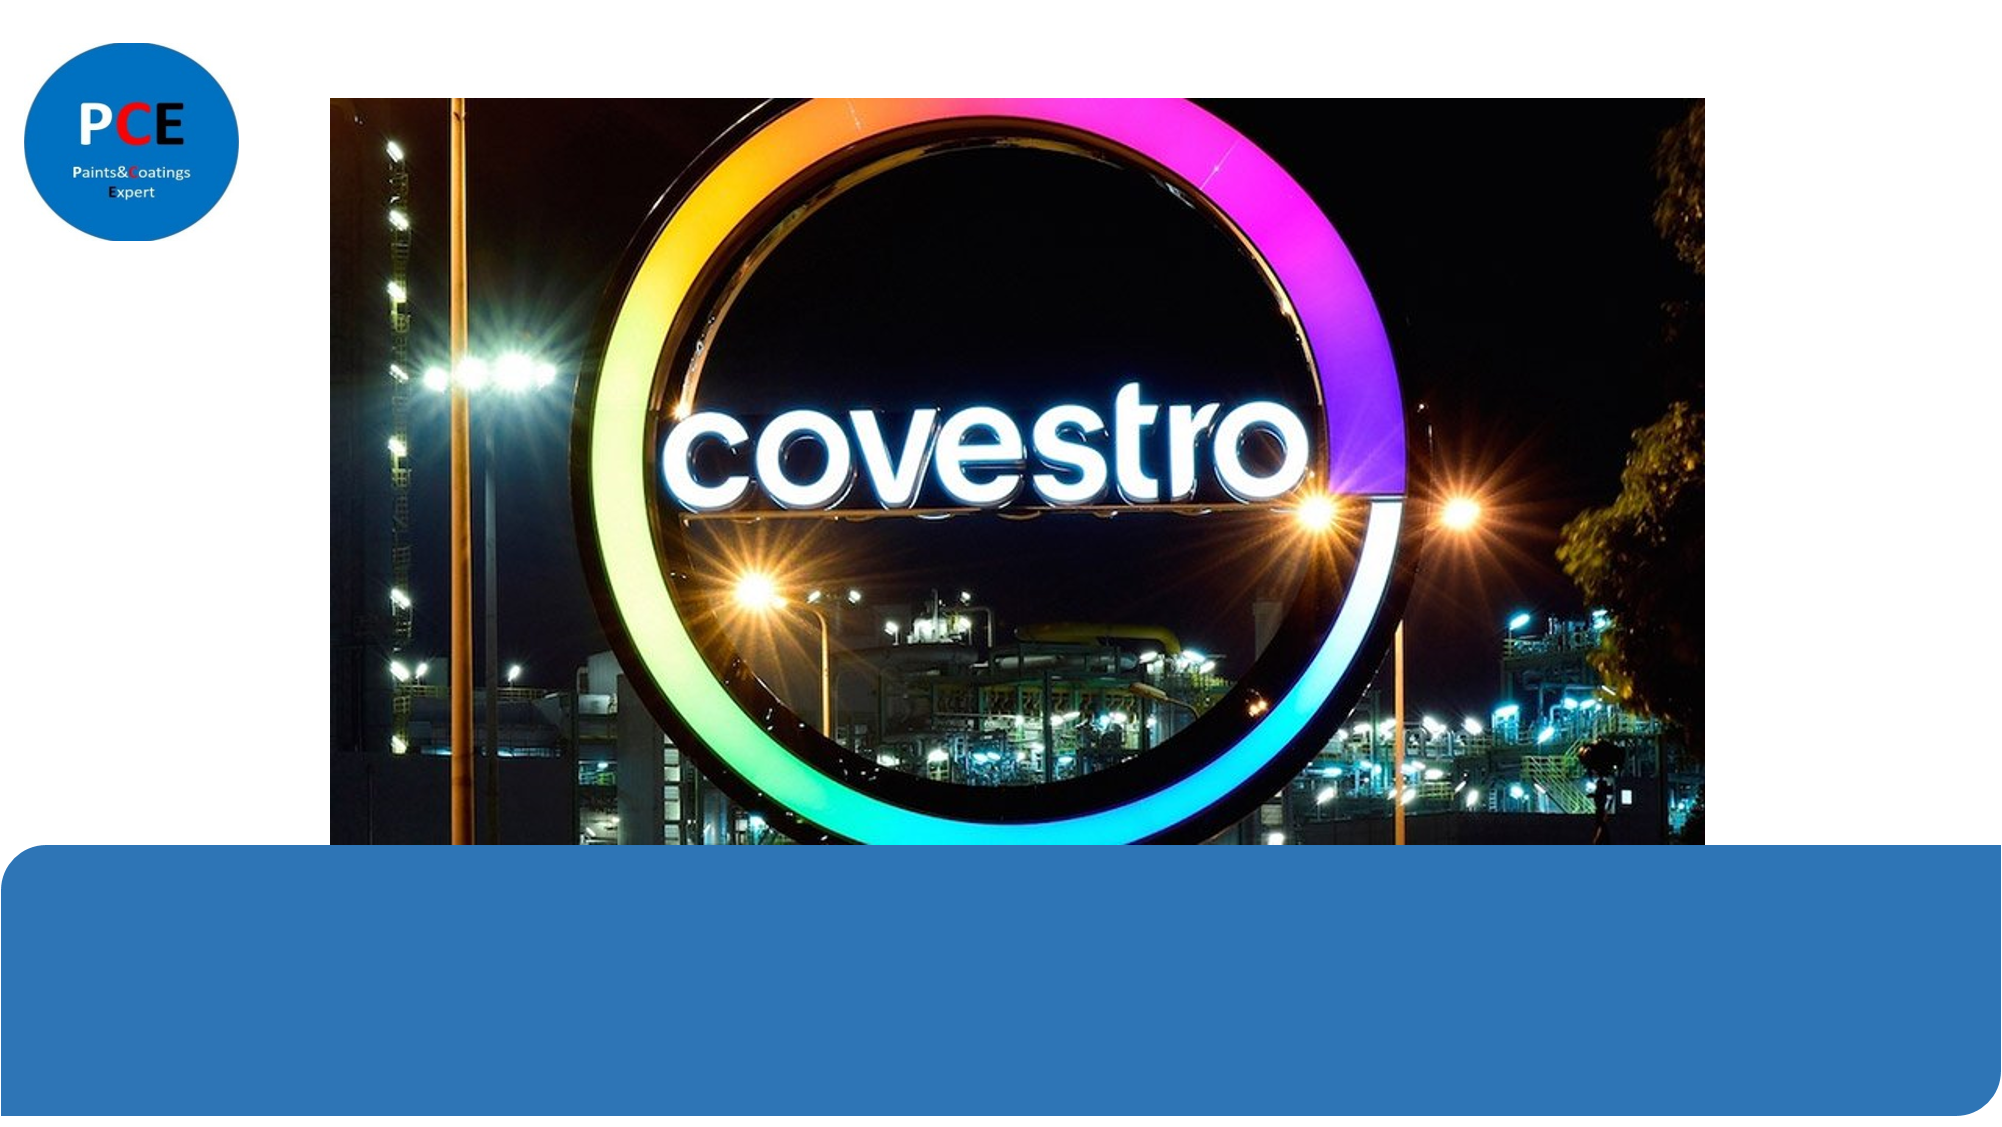 Digital application of high molecular-weight hot-melt adhesives by Covestro